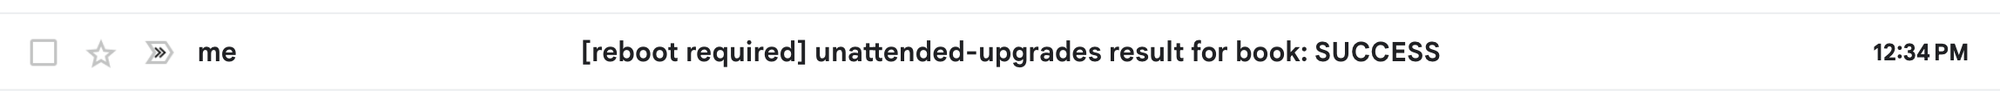 Automatic Server Updates - unattendedUpgrades with email notifications